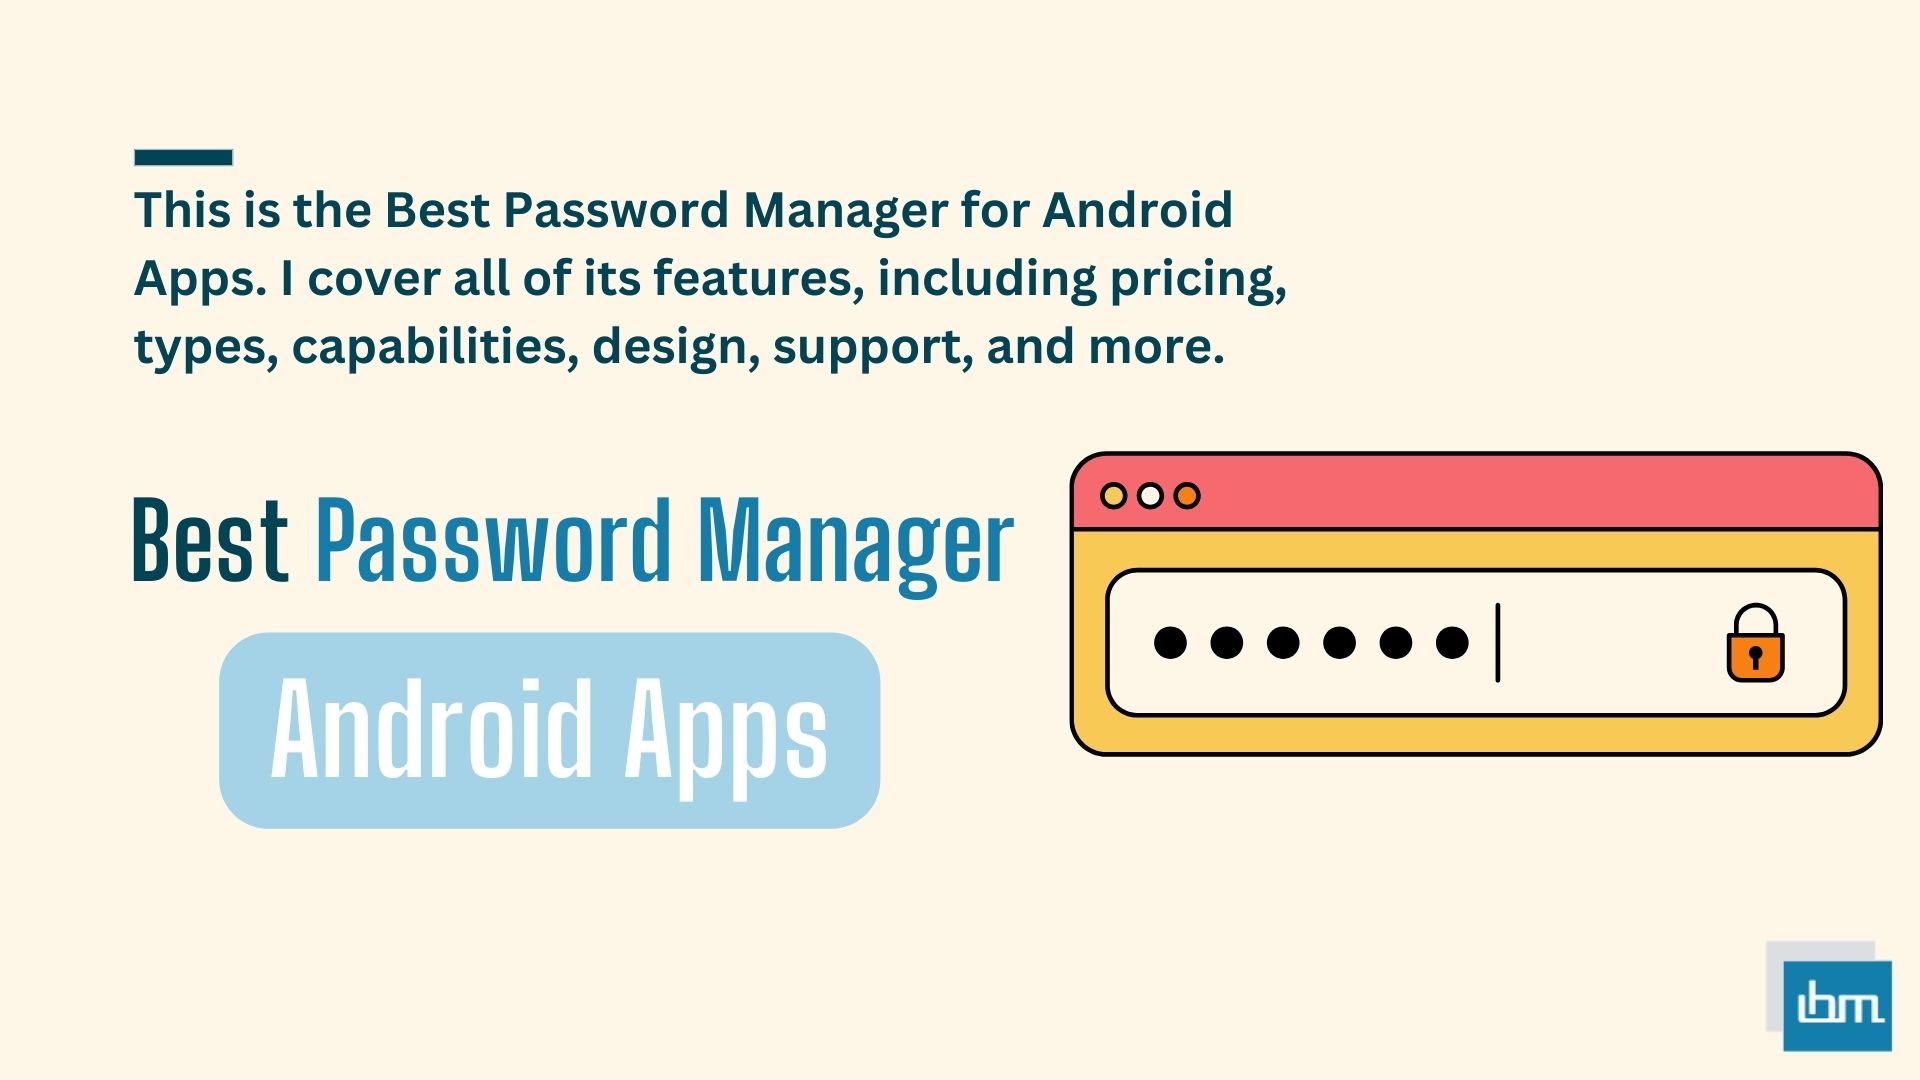 Best Password Manager for Android Apps